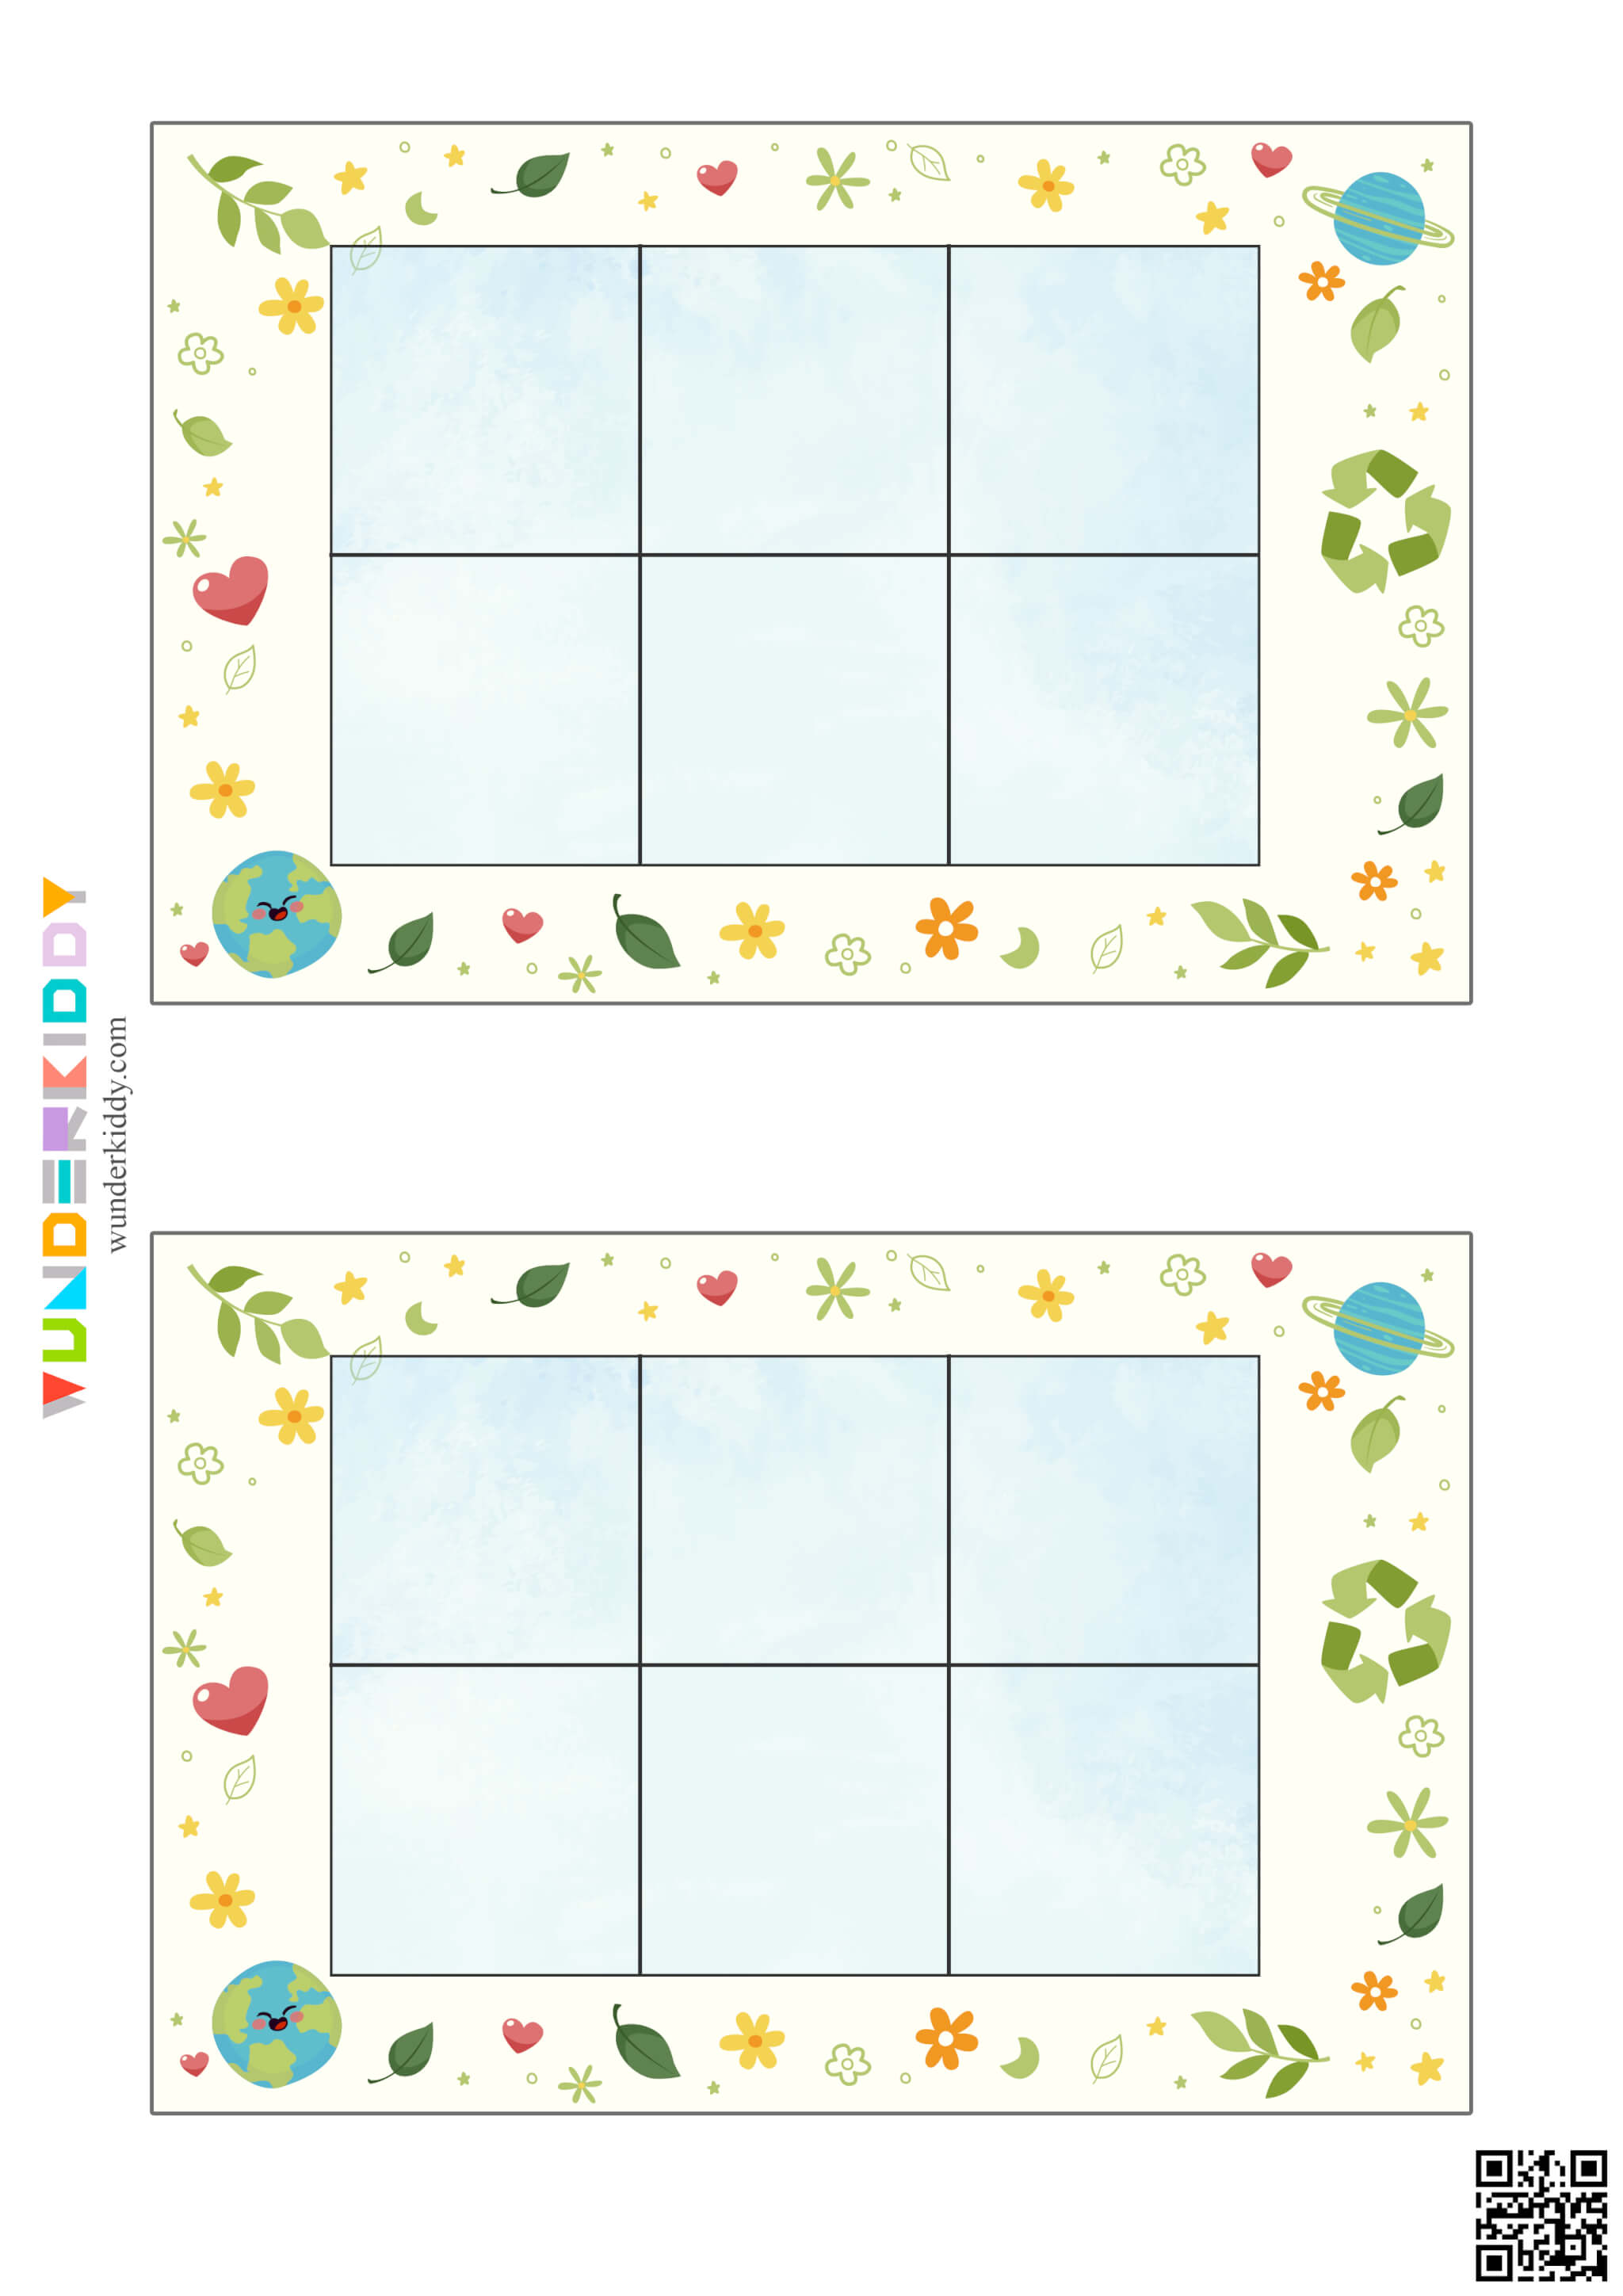 Earth Day Size Sorting Activity - Image 2